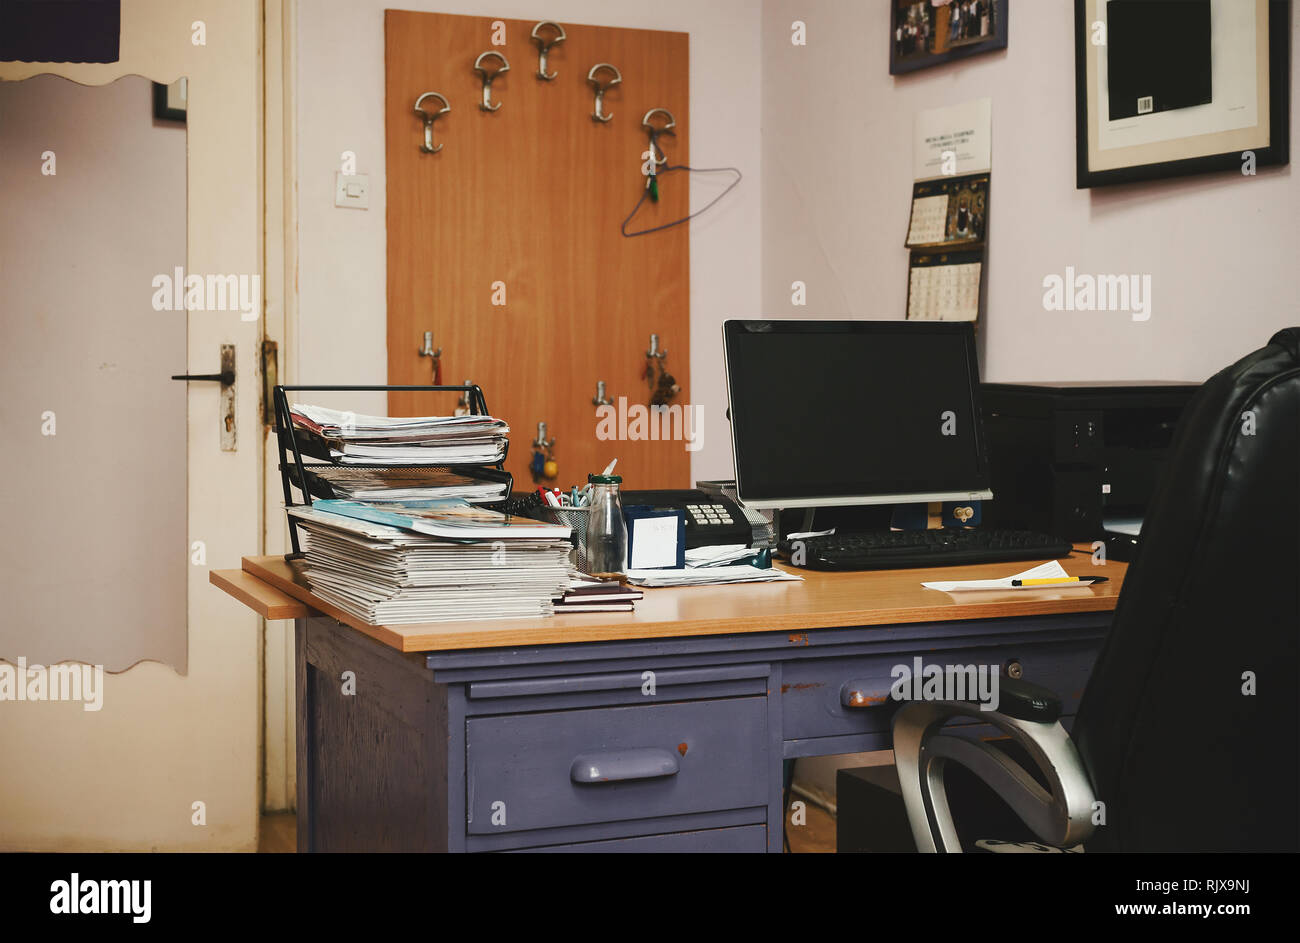 Old messy office, furniture details, closeup view on table full of papers and various working materials. Stock Photo